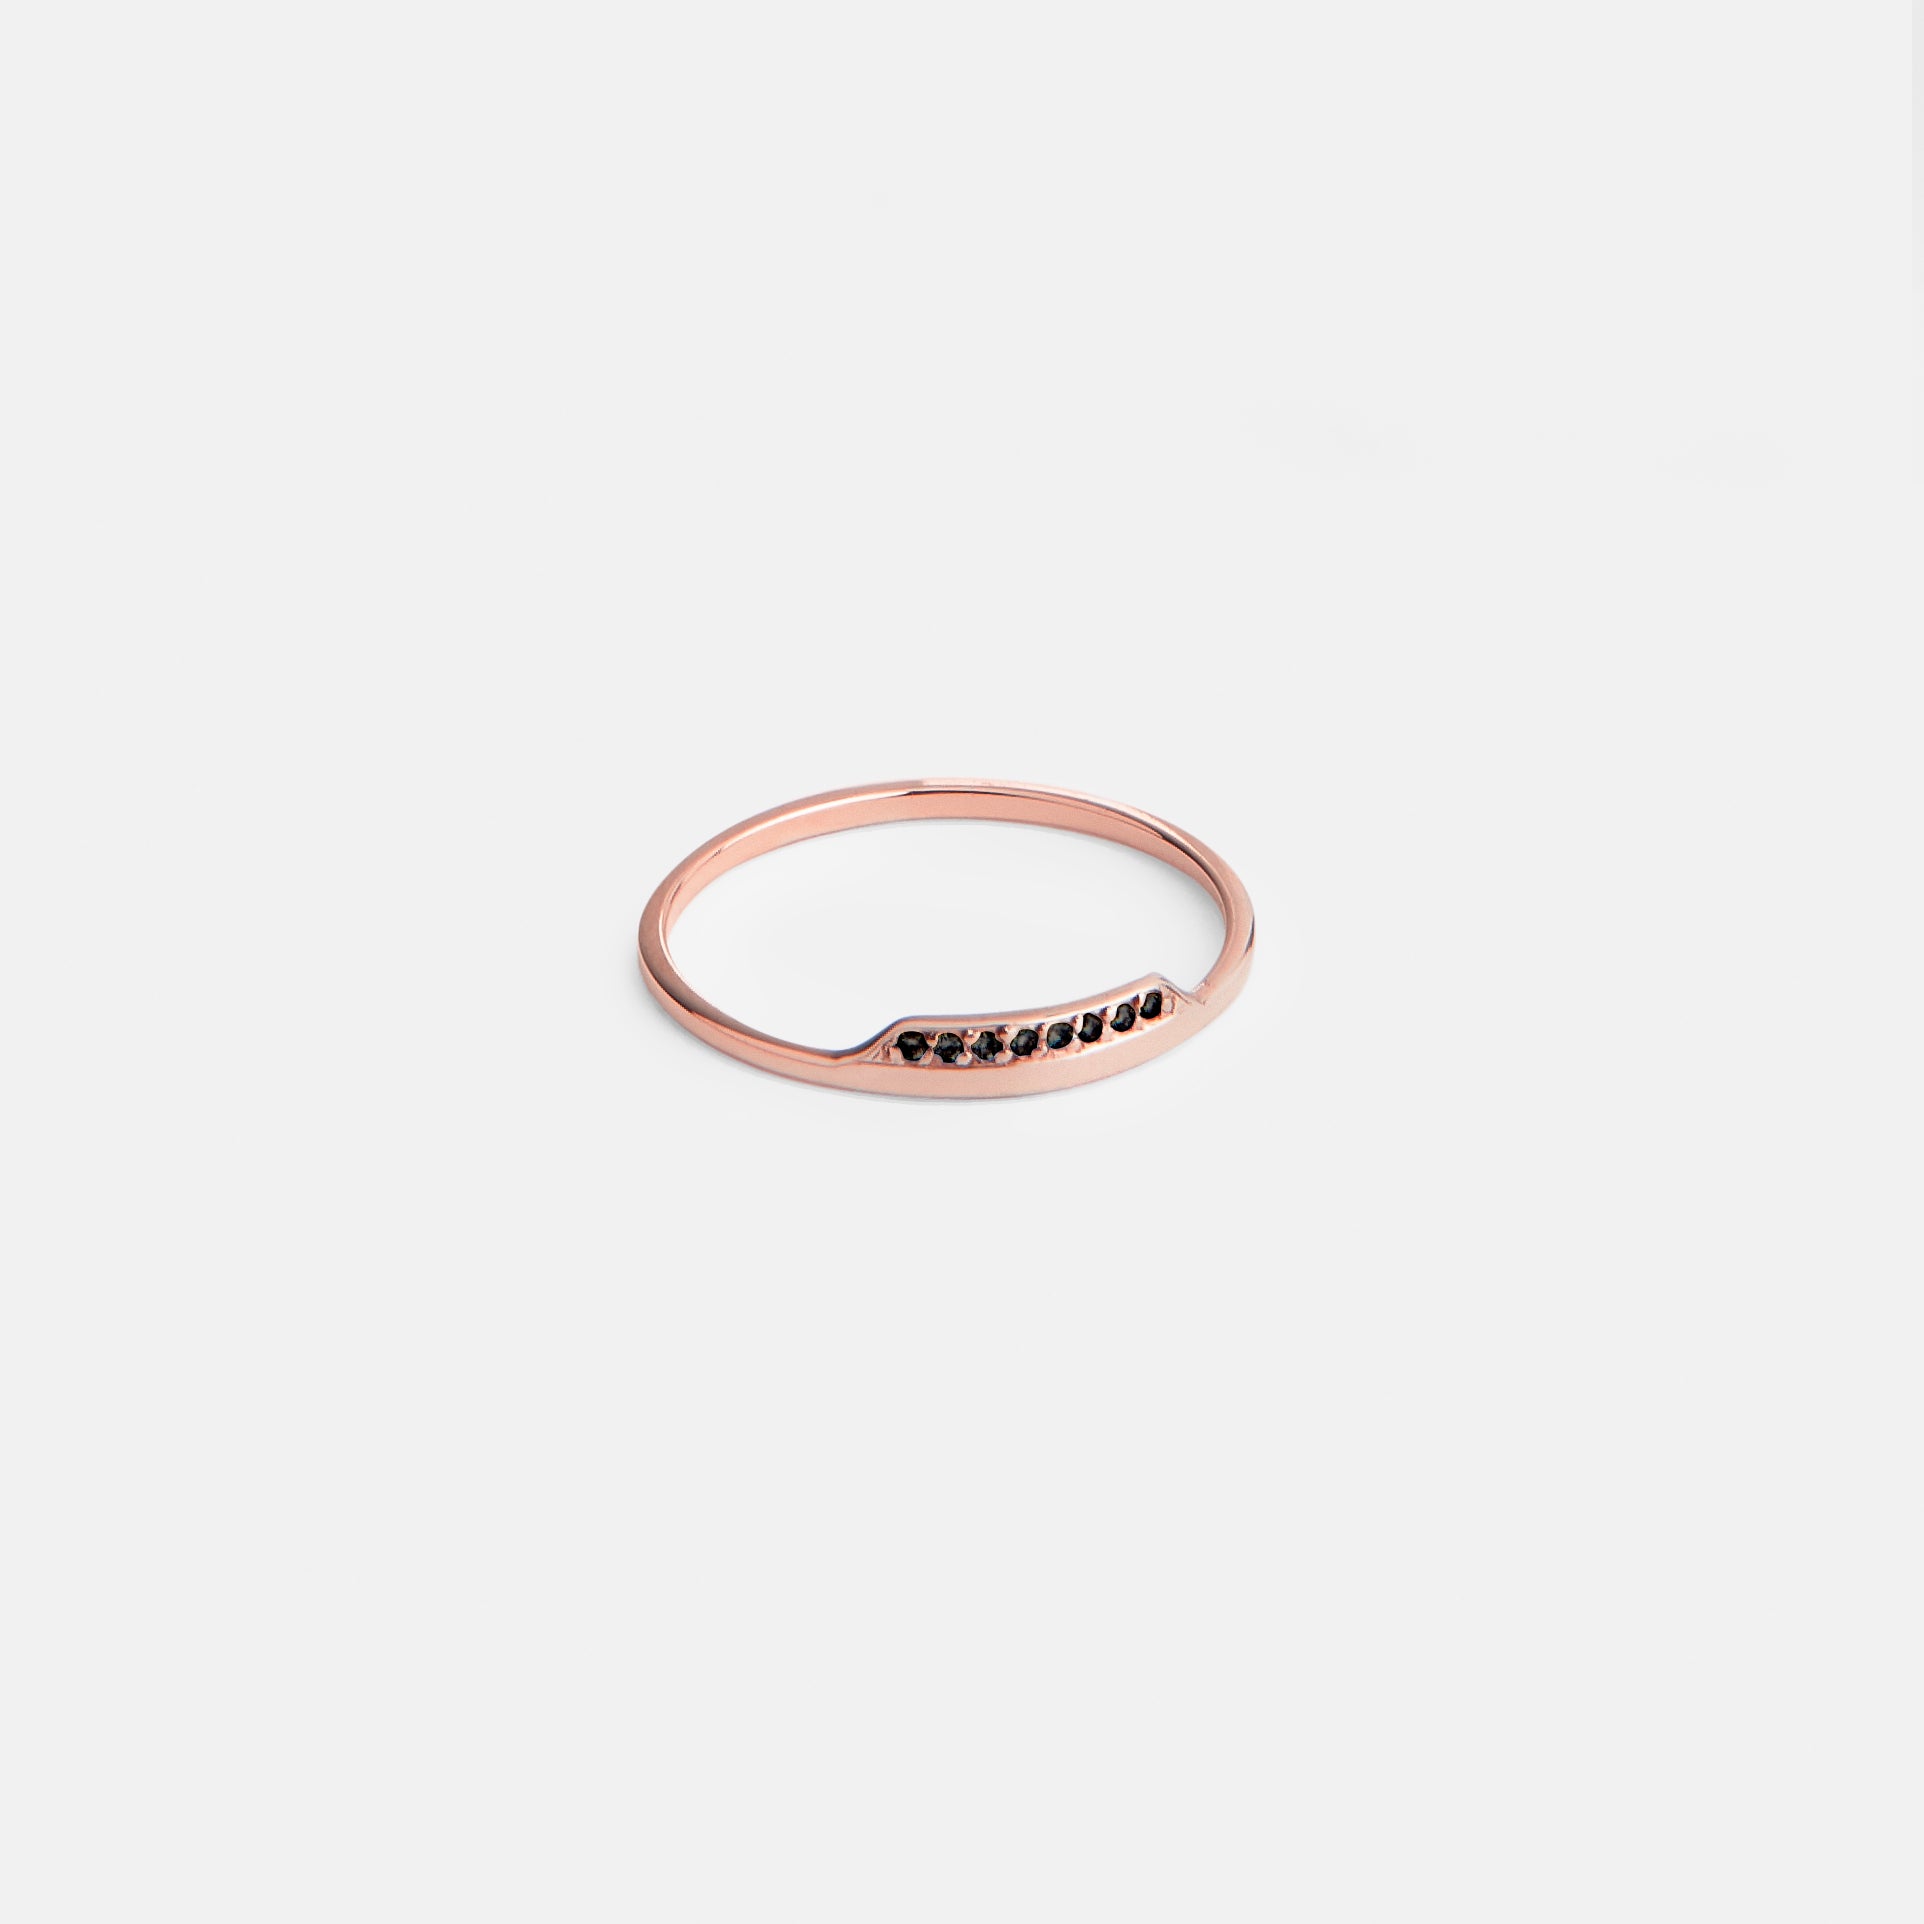 Salo Thin Ring in 14k Rose Gold set with Black Diamonds By SHW Fine Jewelry NYC